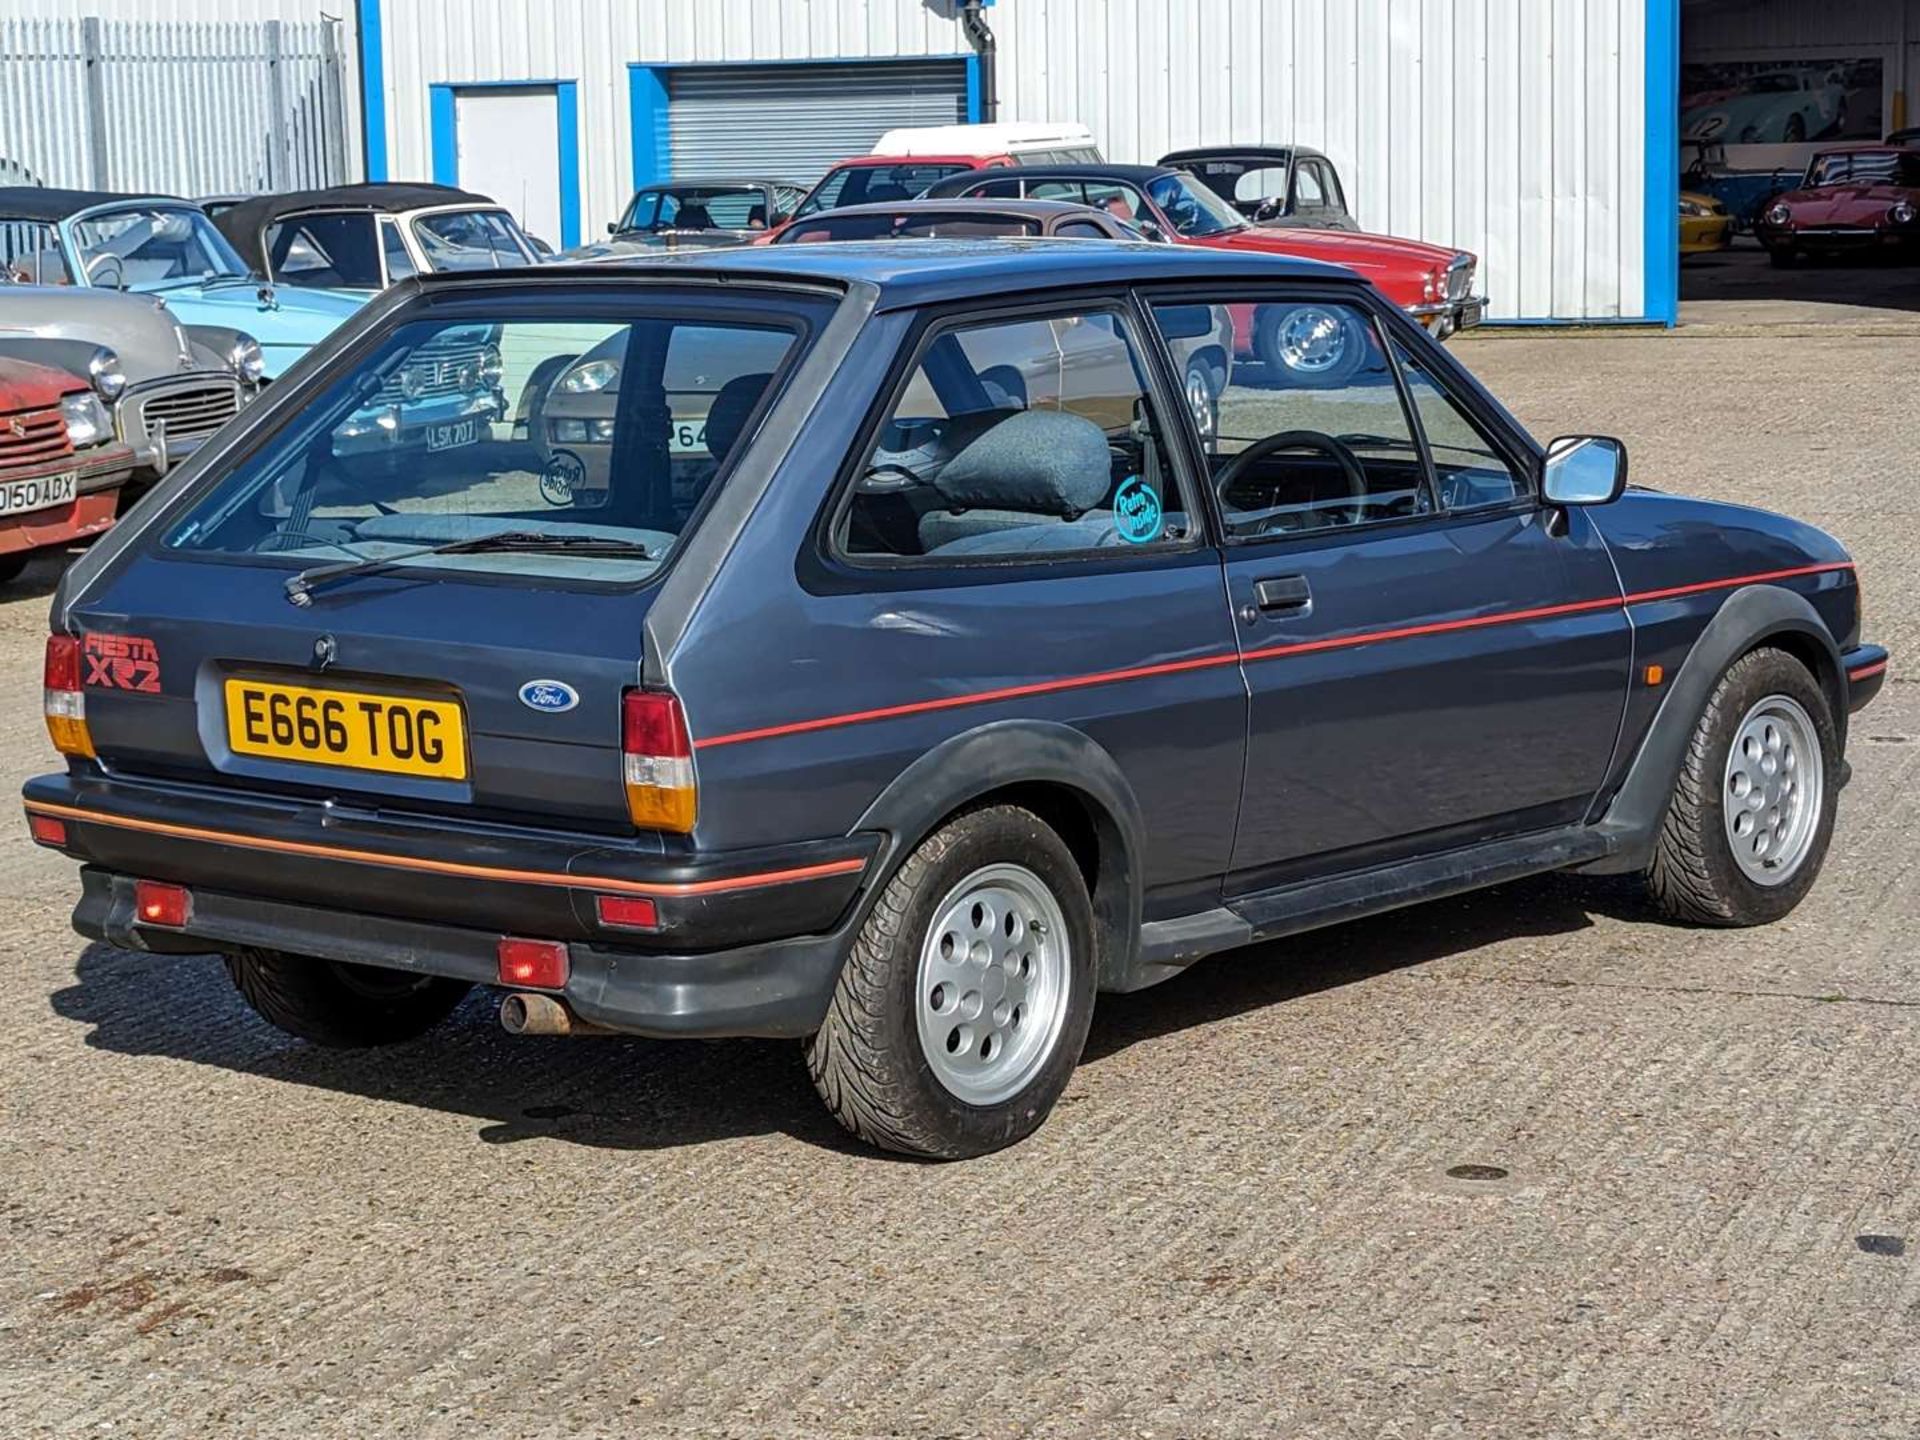 1987 FORD FIESTA XR2 - Image 8 of 25